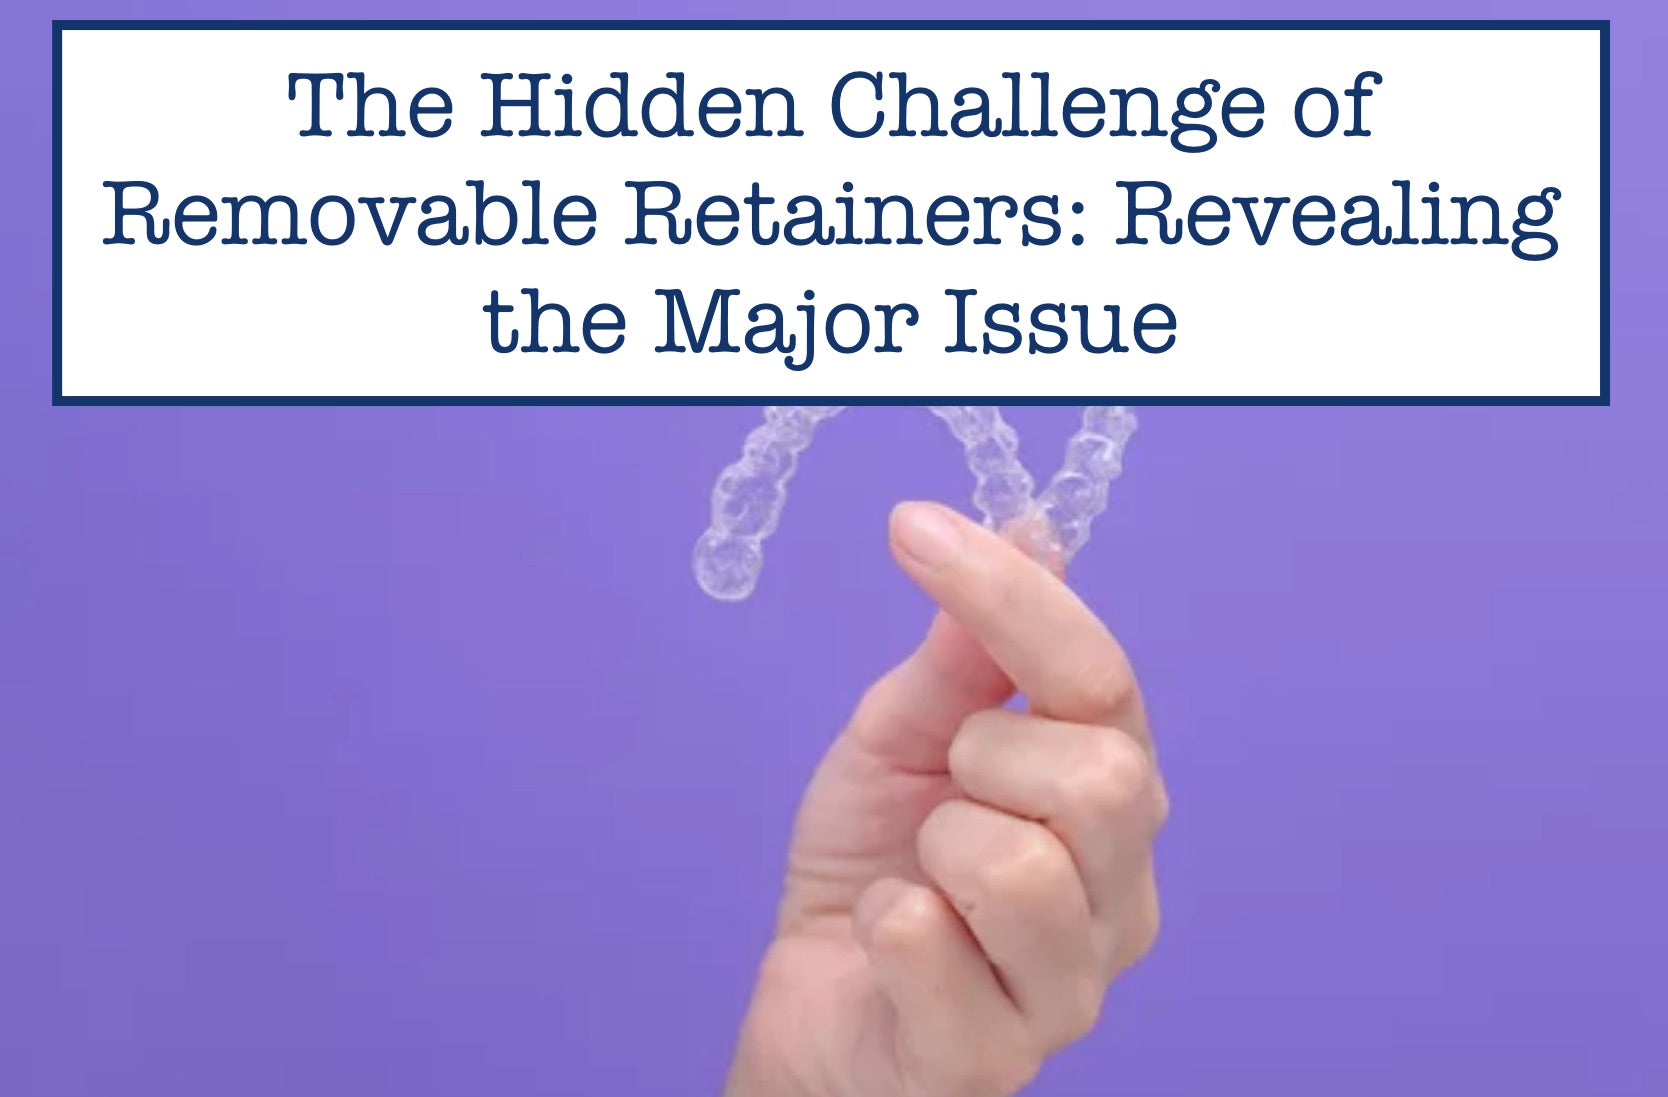 The Hidden Challenge of Removable Retainers: Revealing the Major Issue